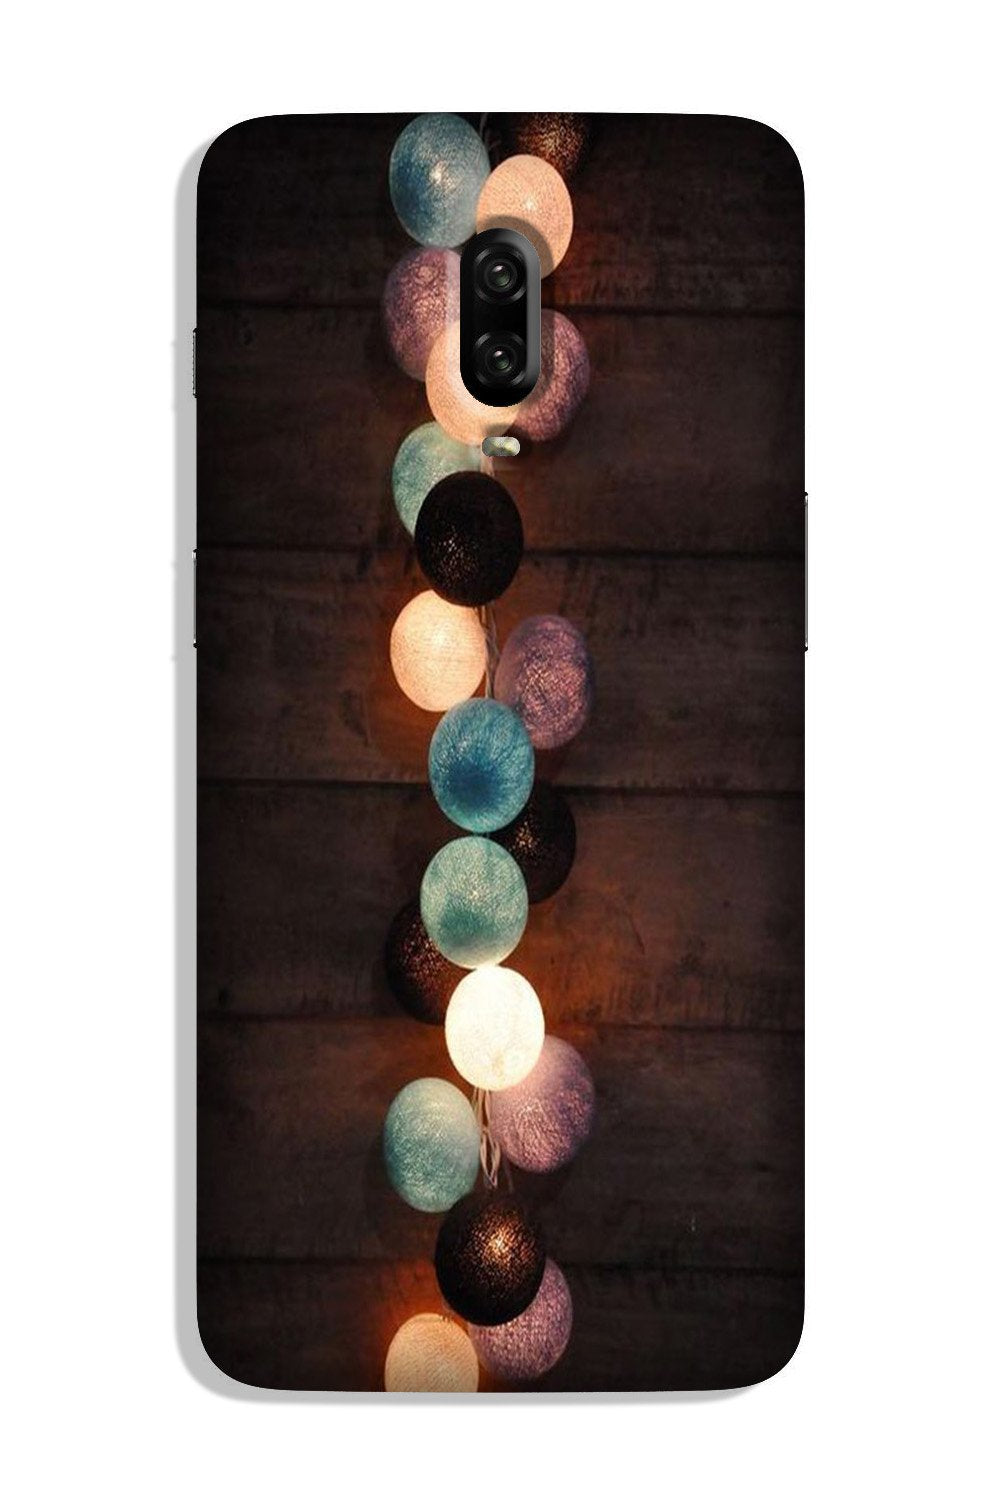 Party Lights Case for OnePlus 6T (Design No. 209)